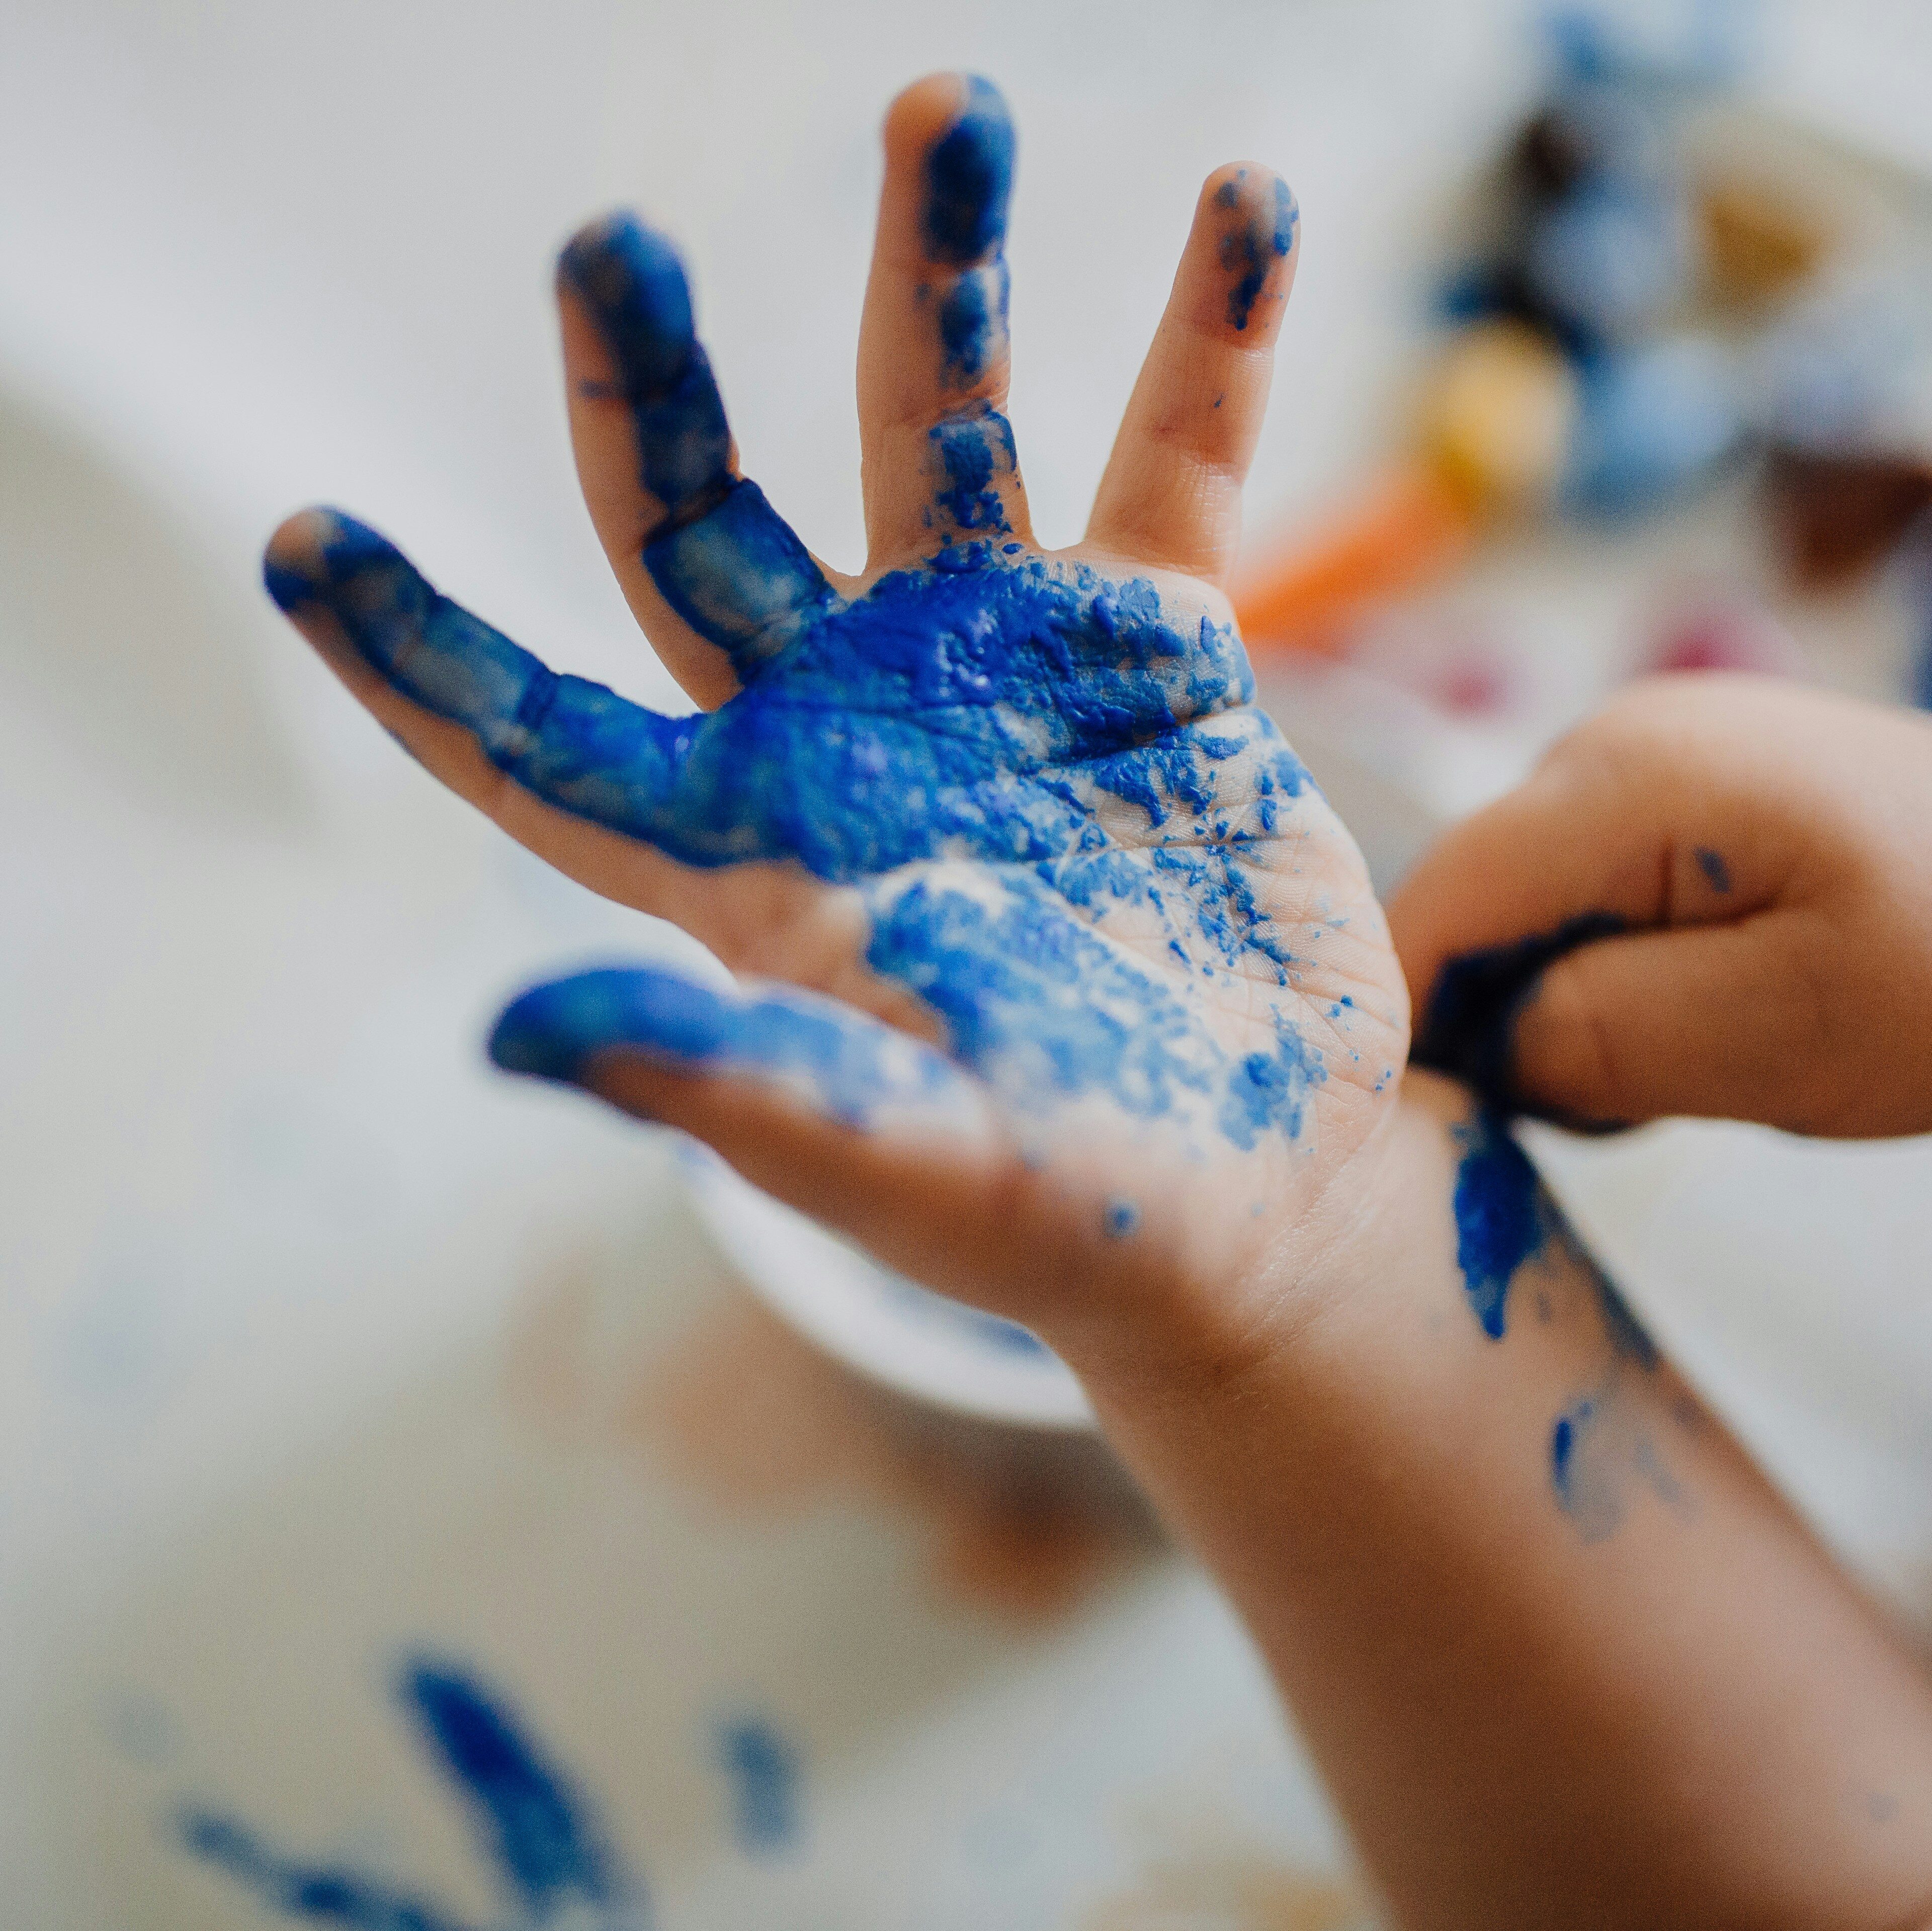 A child’s hand with blue paint on it after making arts and crafts.